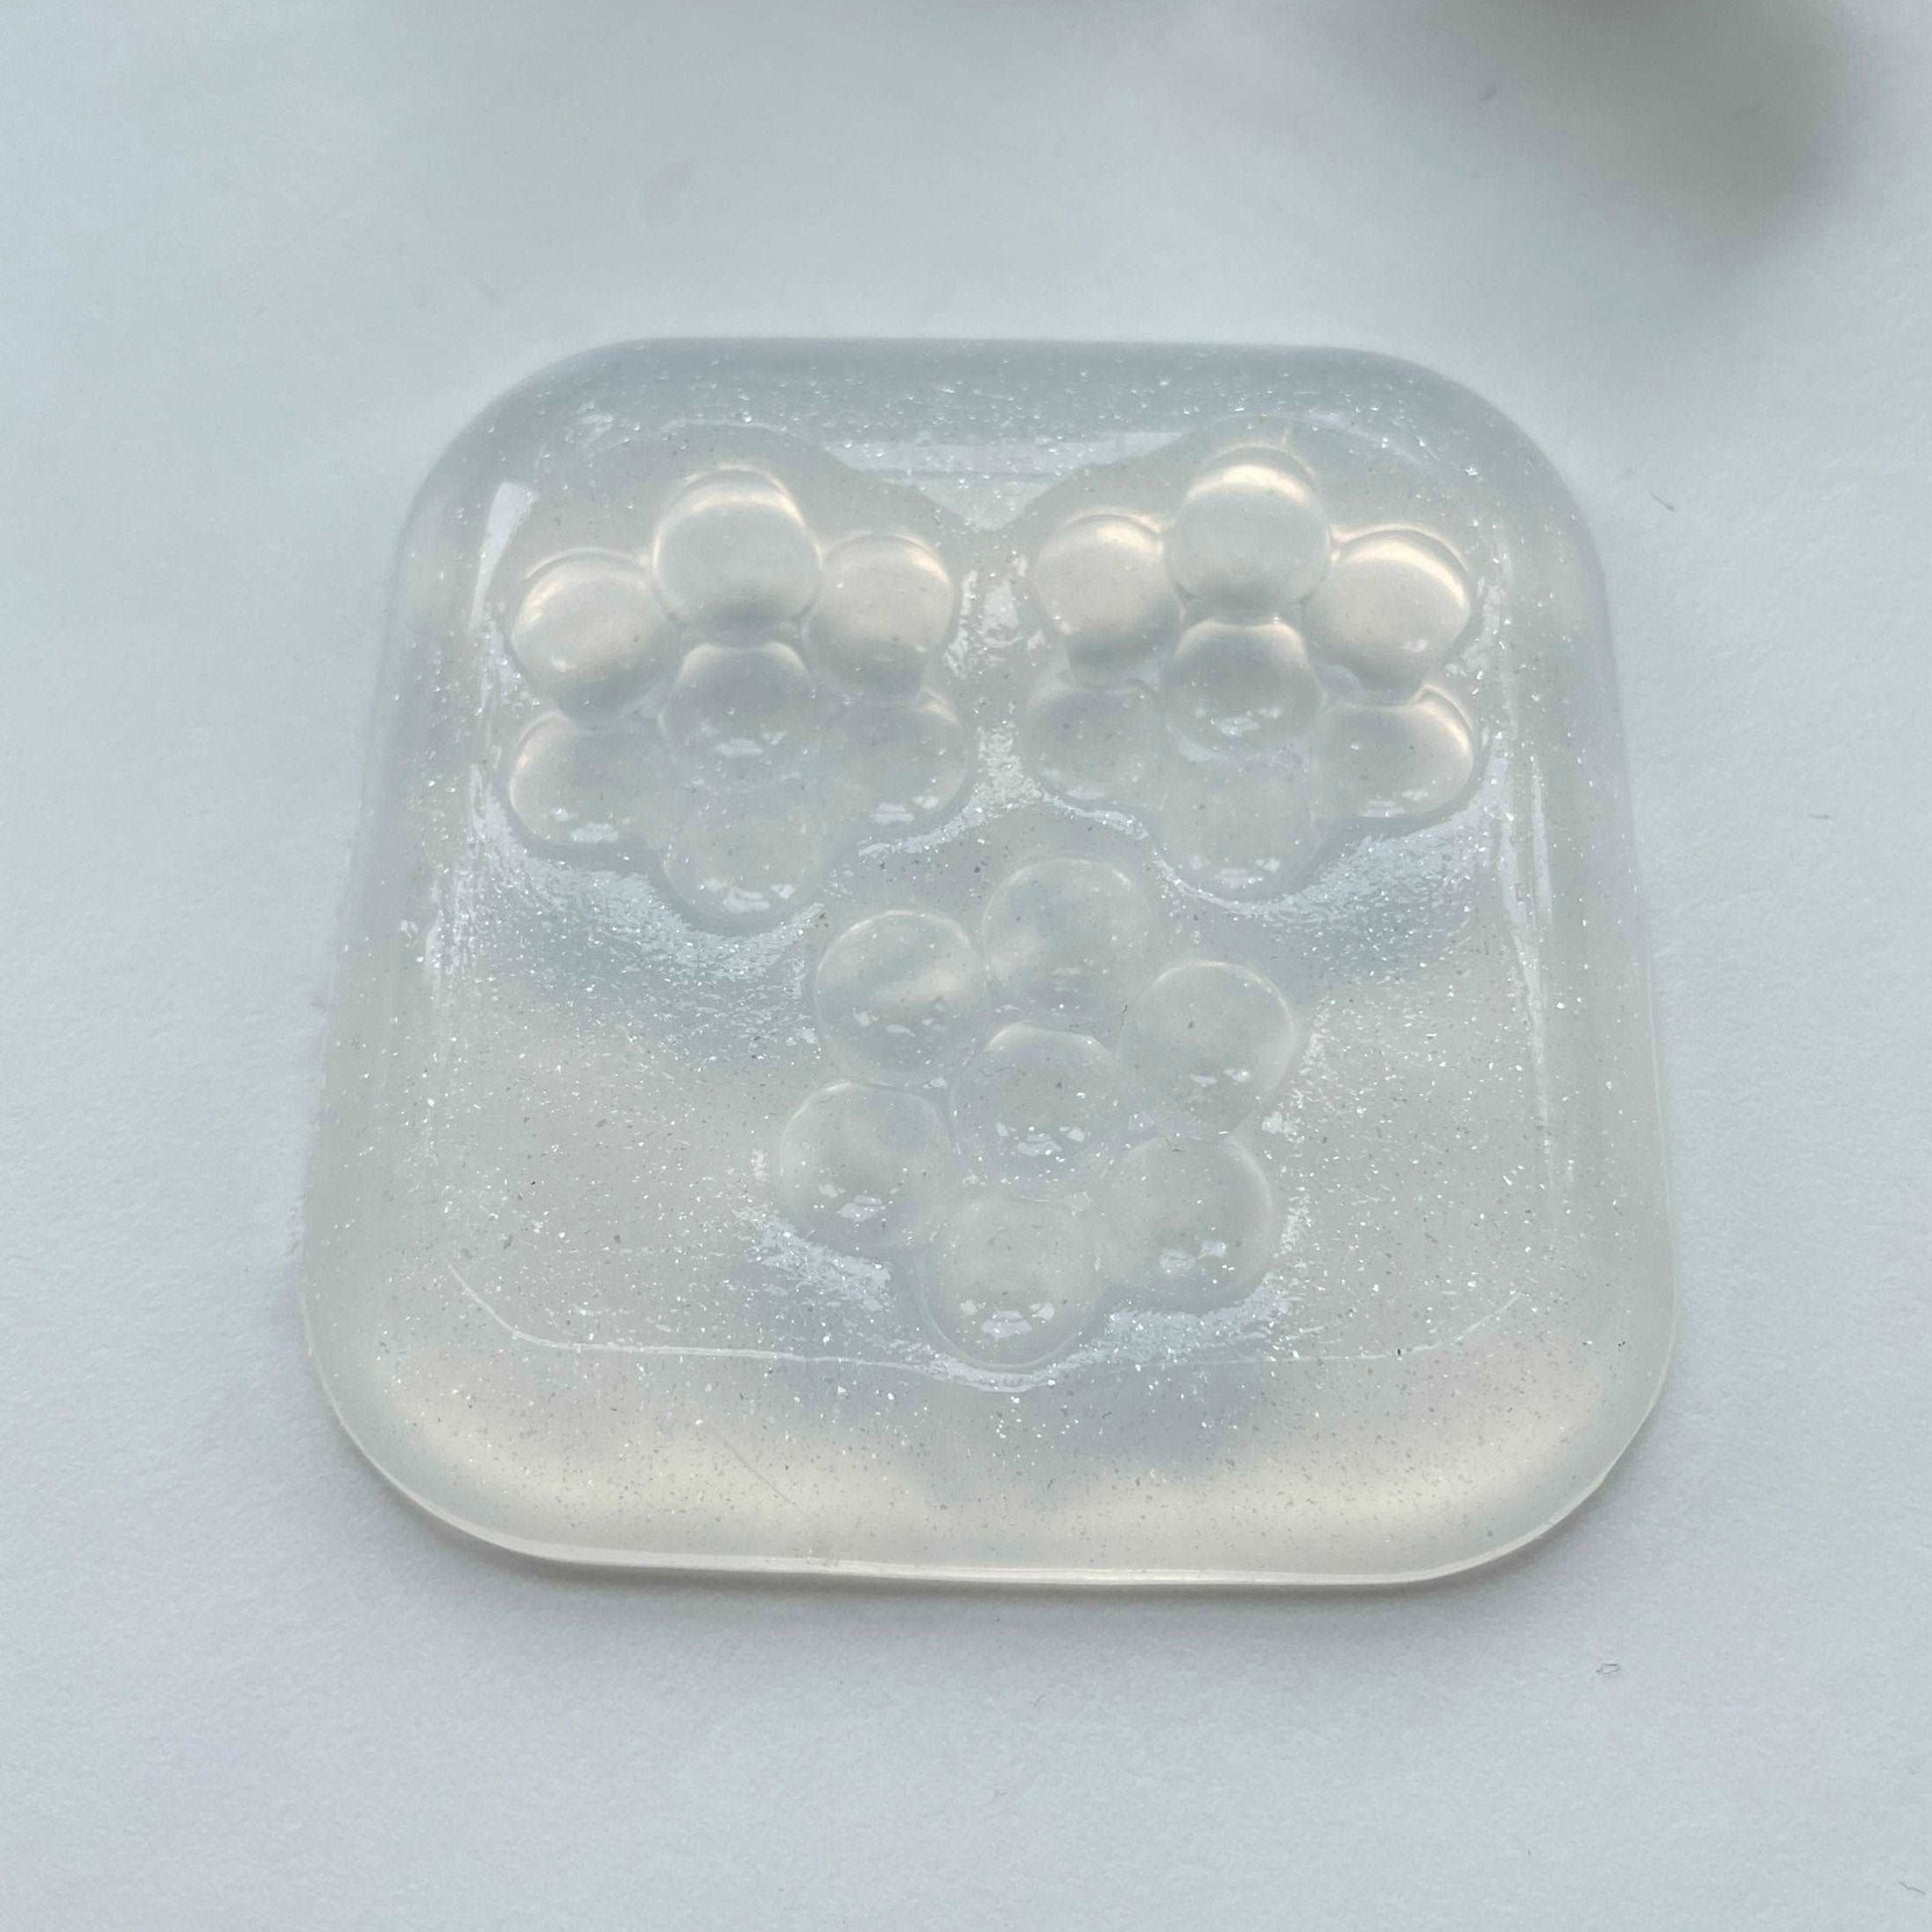 3 Flower Bubble Jewelry Mold Transparent Silicone Mold Resin molds for pendants, earrings, necklaces, rings, jewelry making DIY...bijouterie